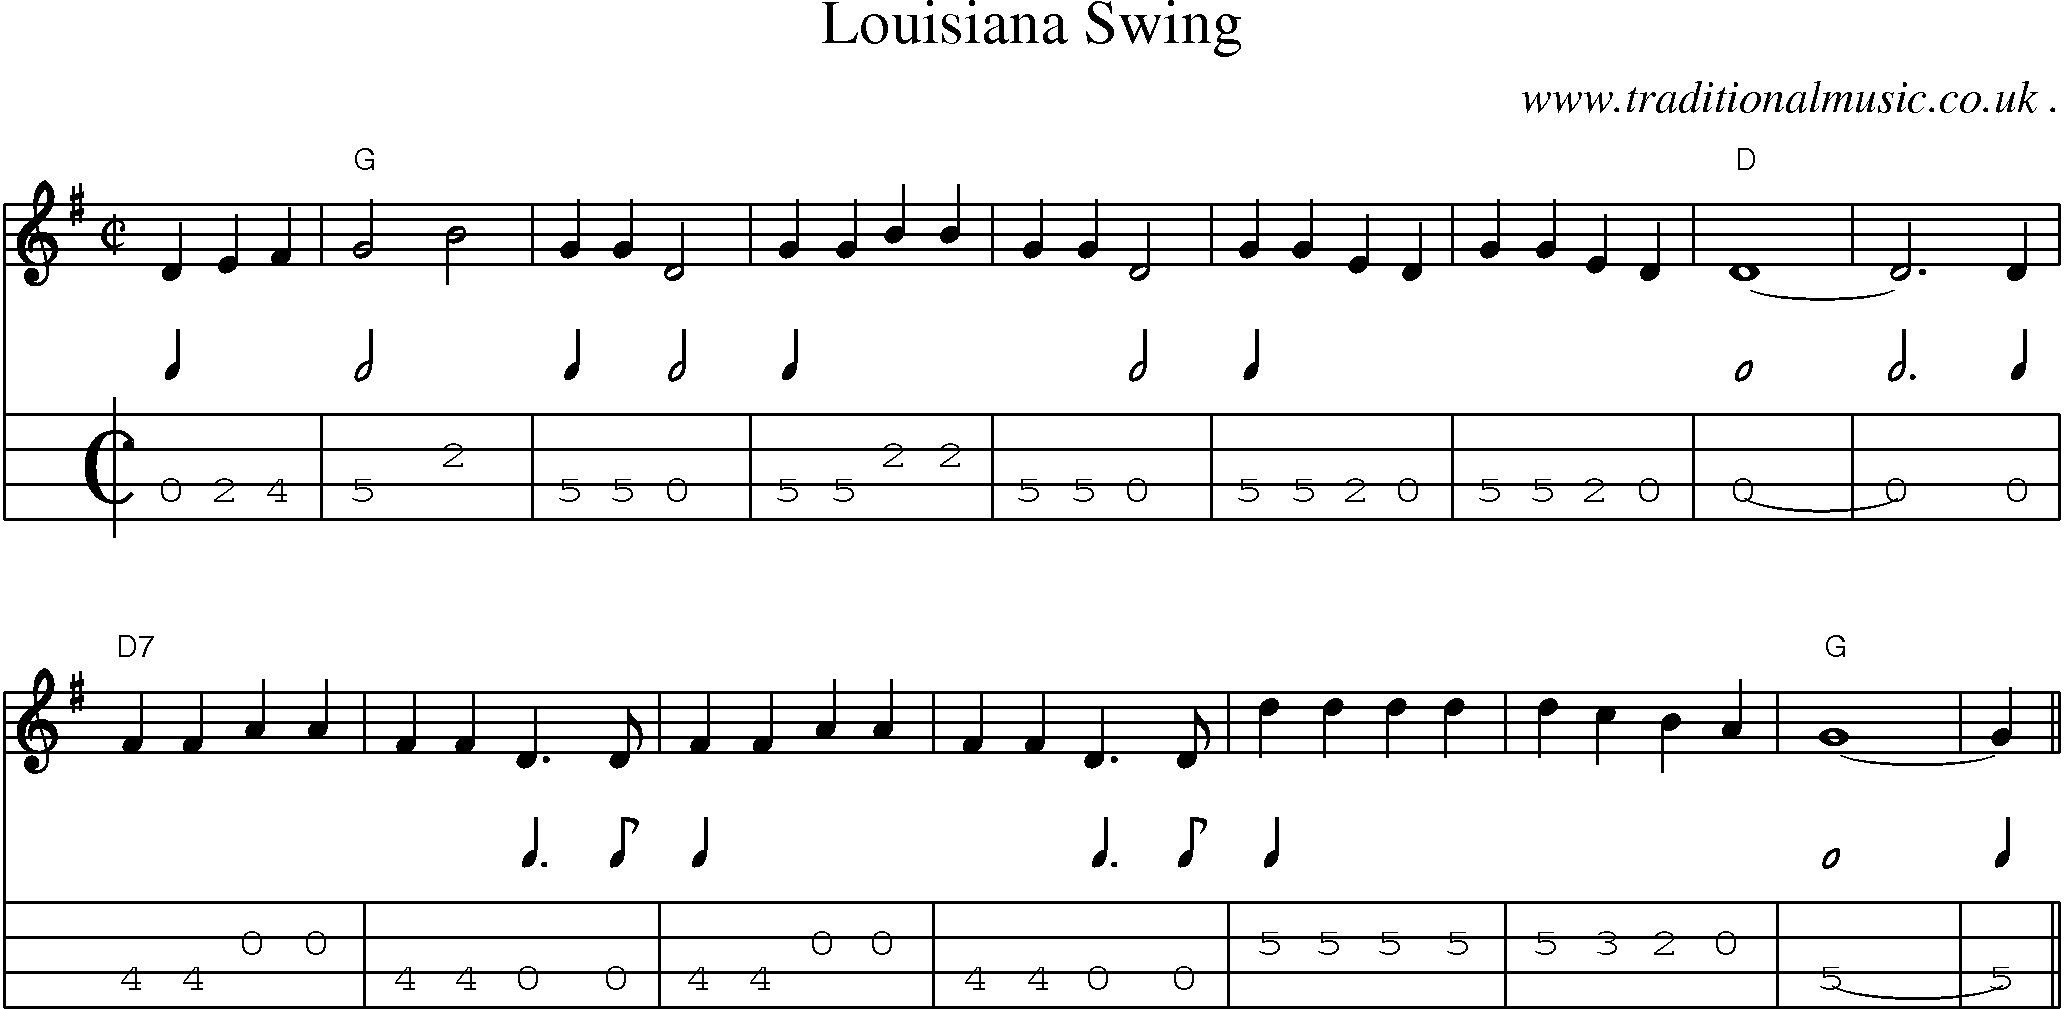 Music Score and Guitar Tabs for Louisiana Swing